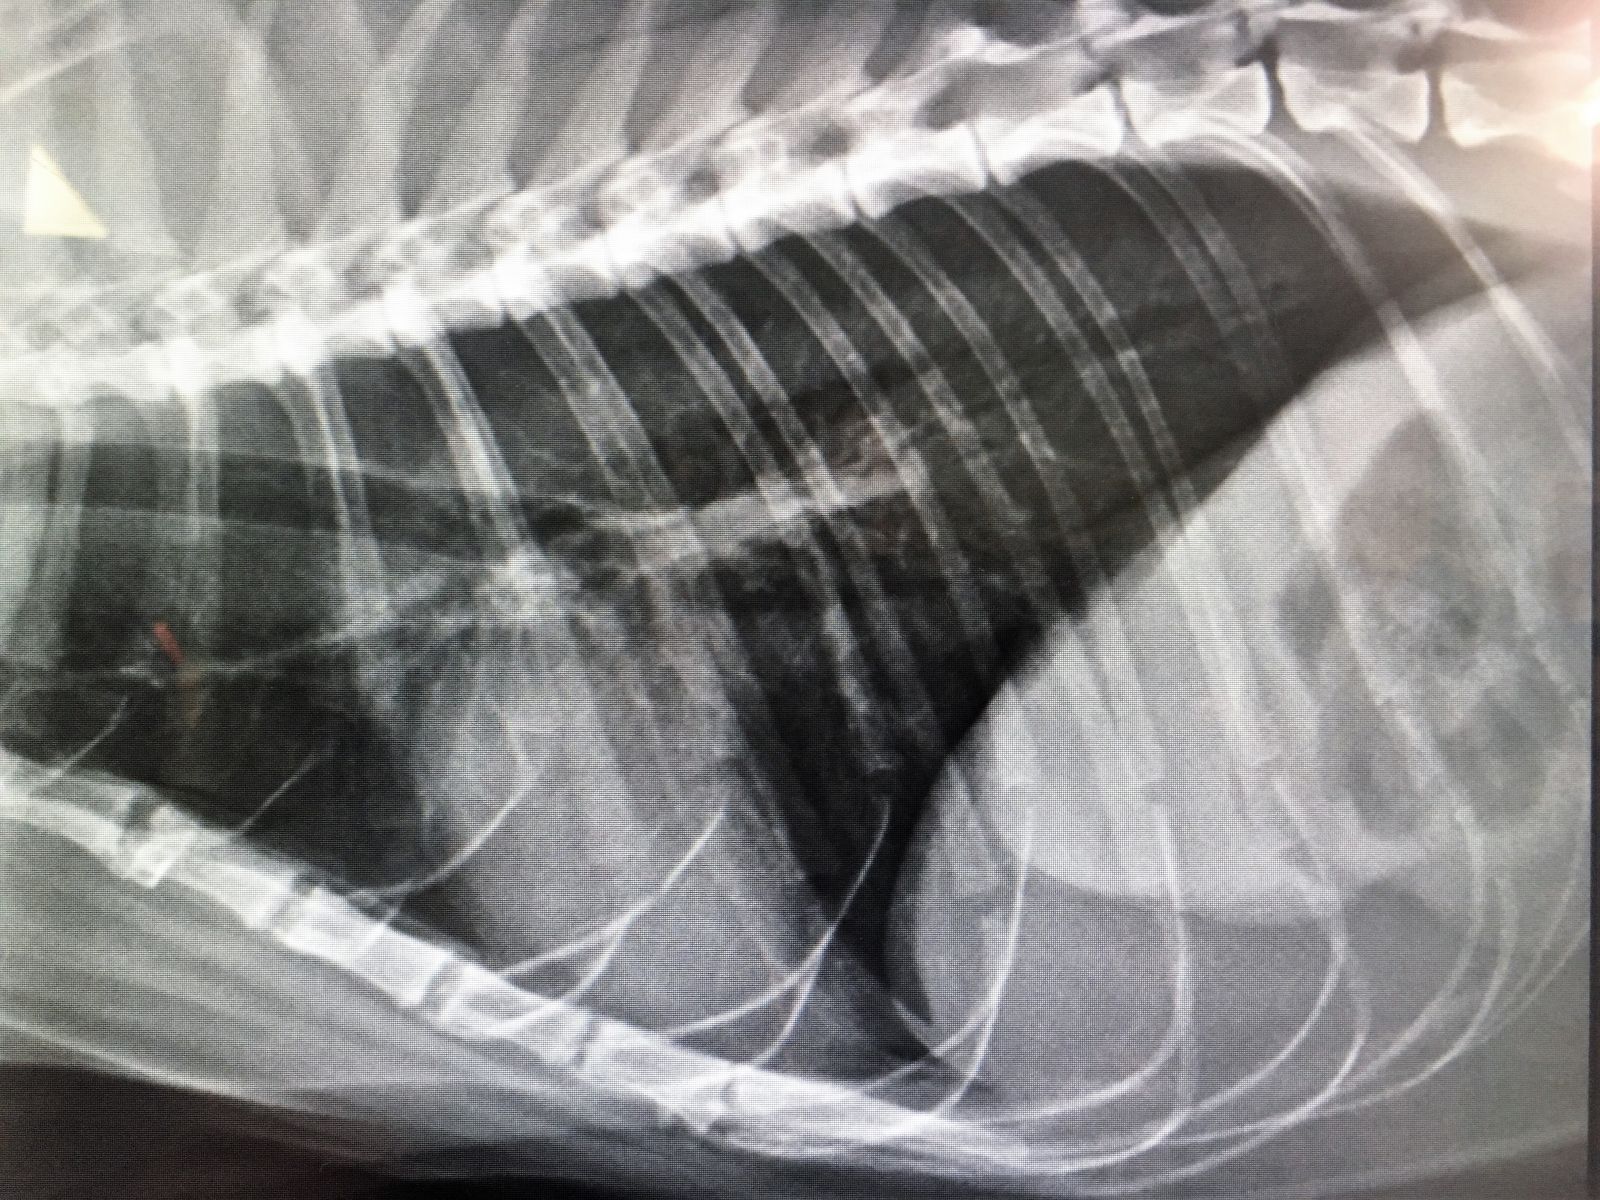 Radiograph of cat